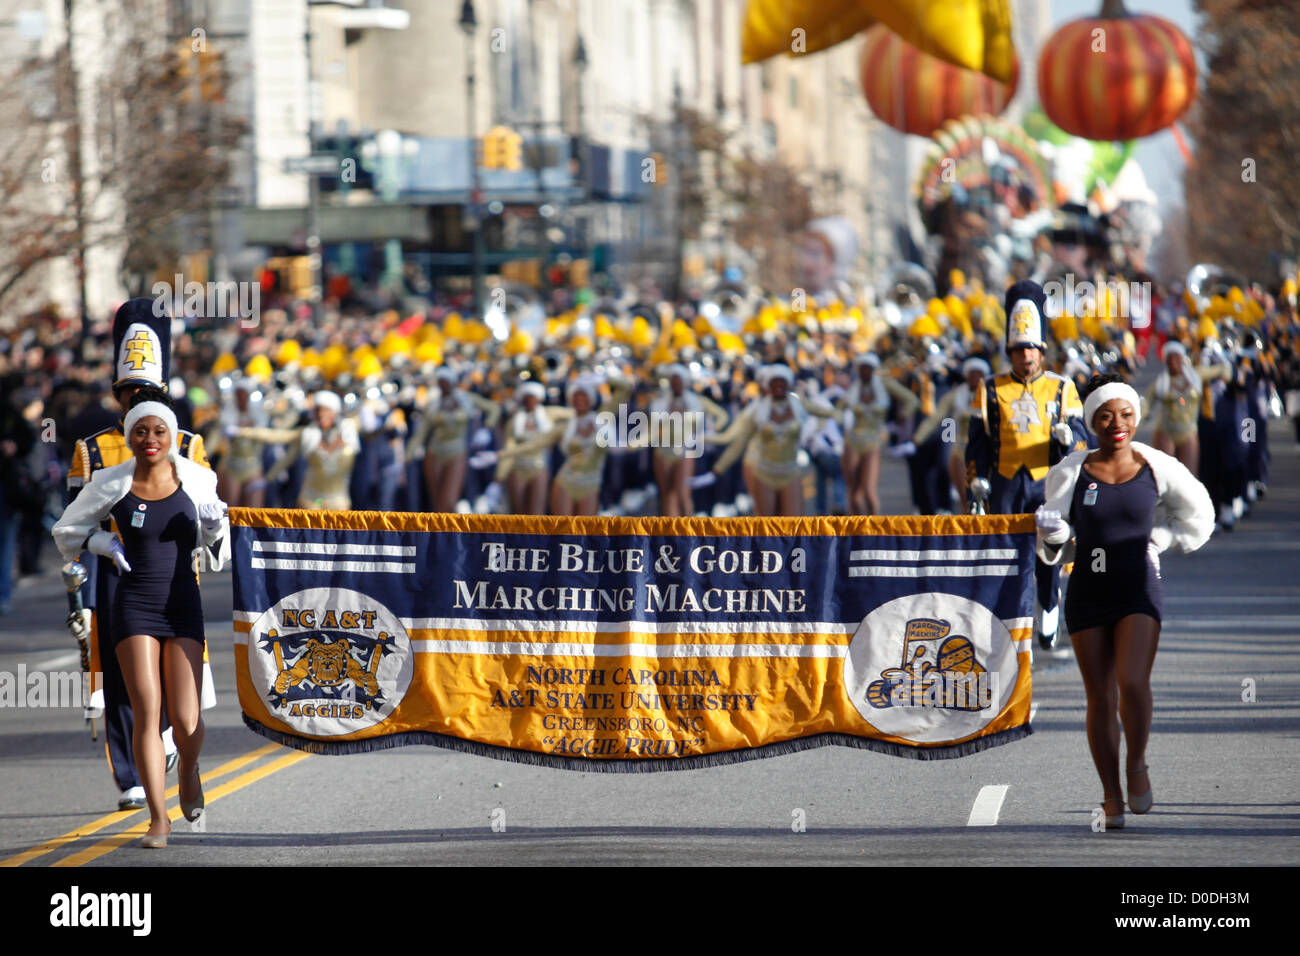 North Carolina A&T State University Marching Band à Macy's Thanksgiving Day Parade à New York, le Jeudi, Novembre 22, 2012. Banque D'Images